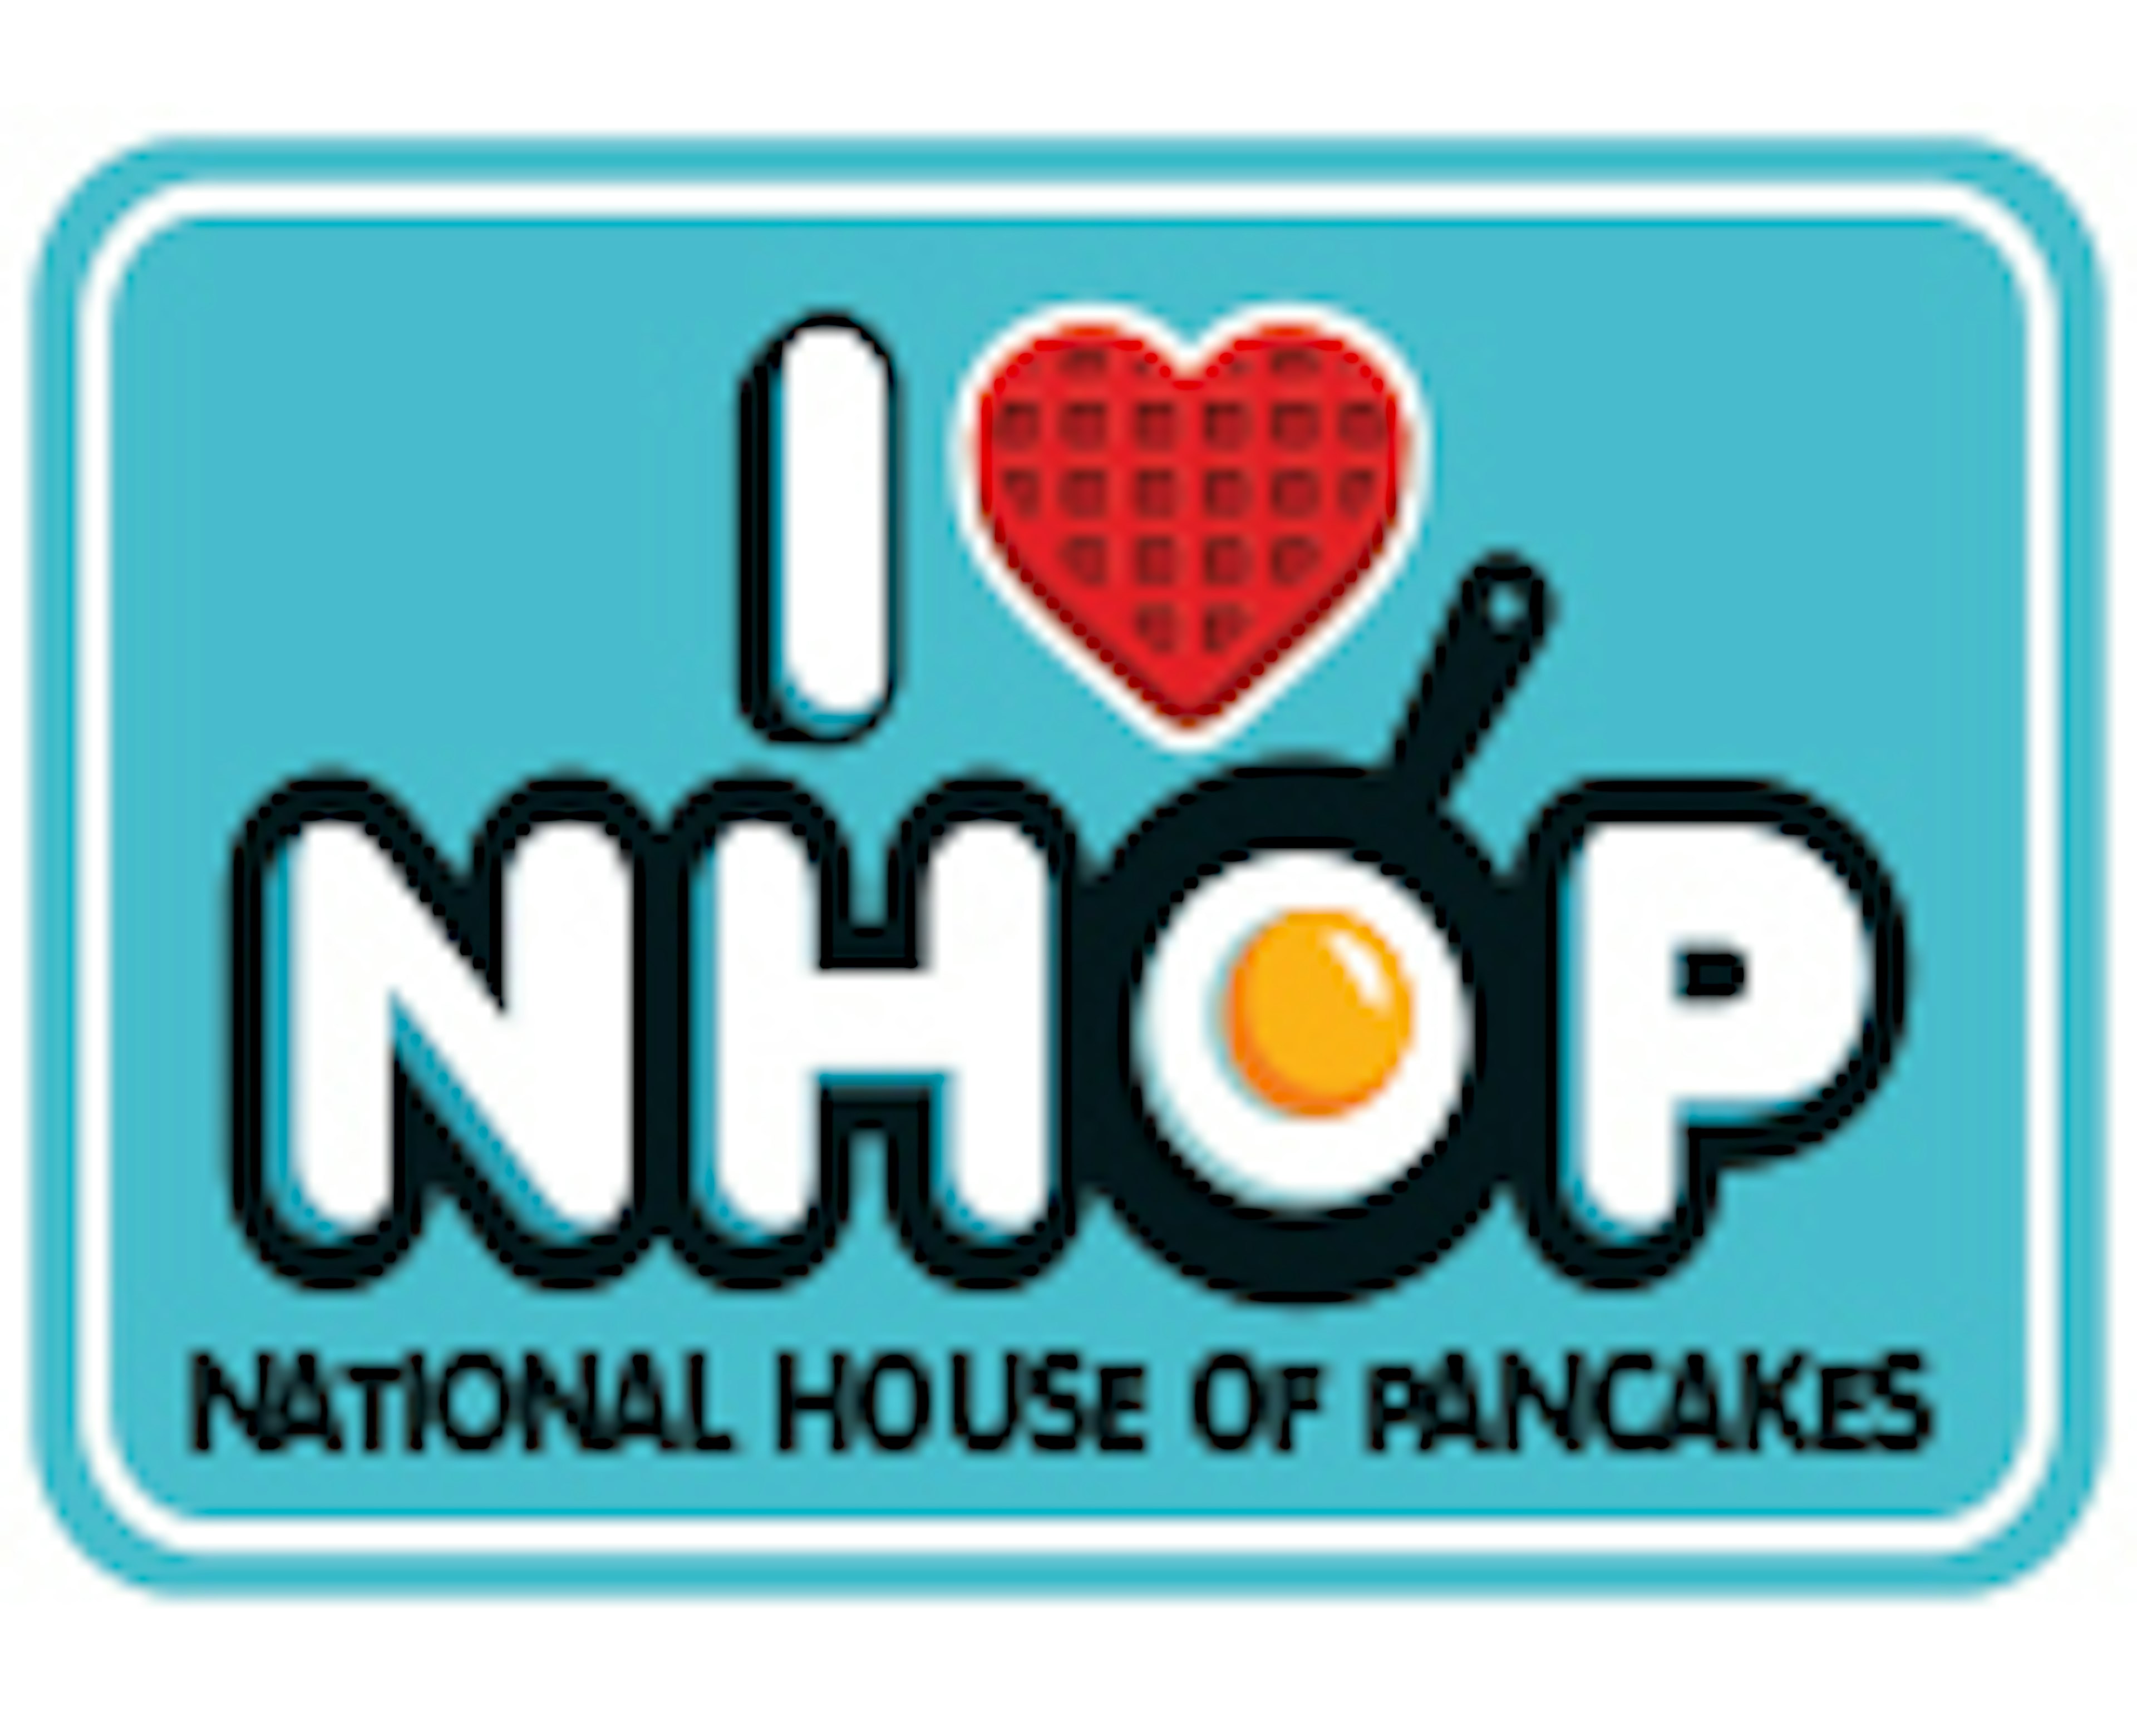 National House of Pancakes